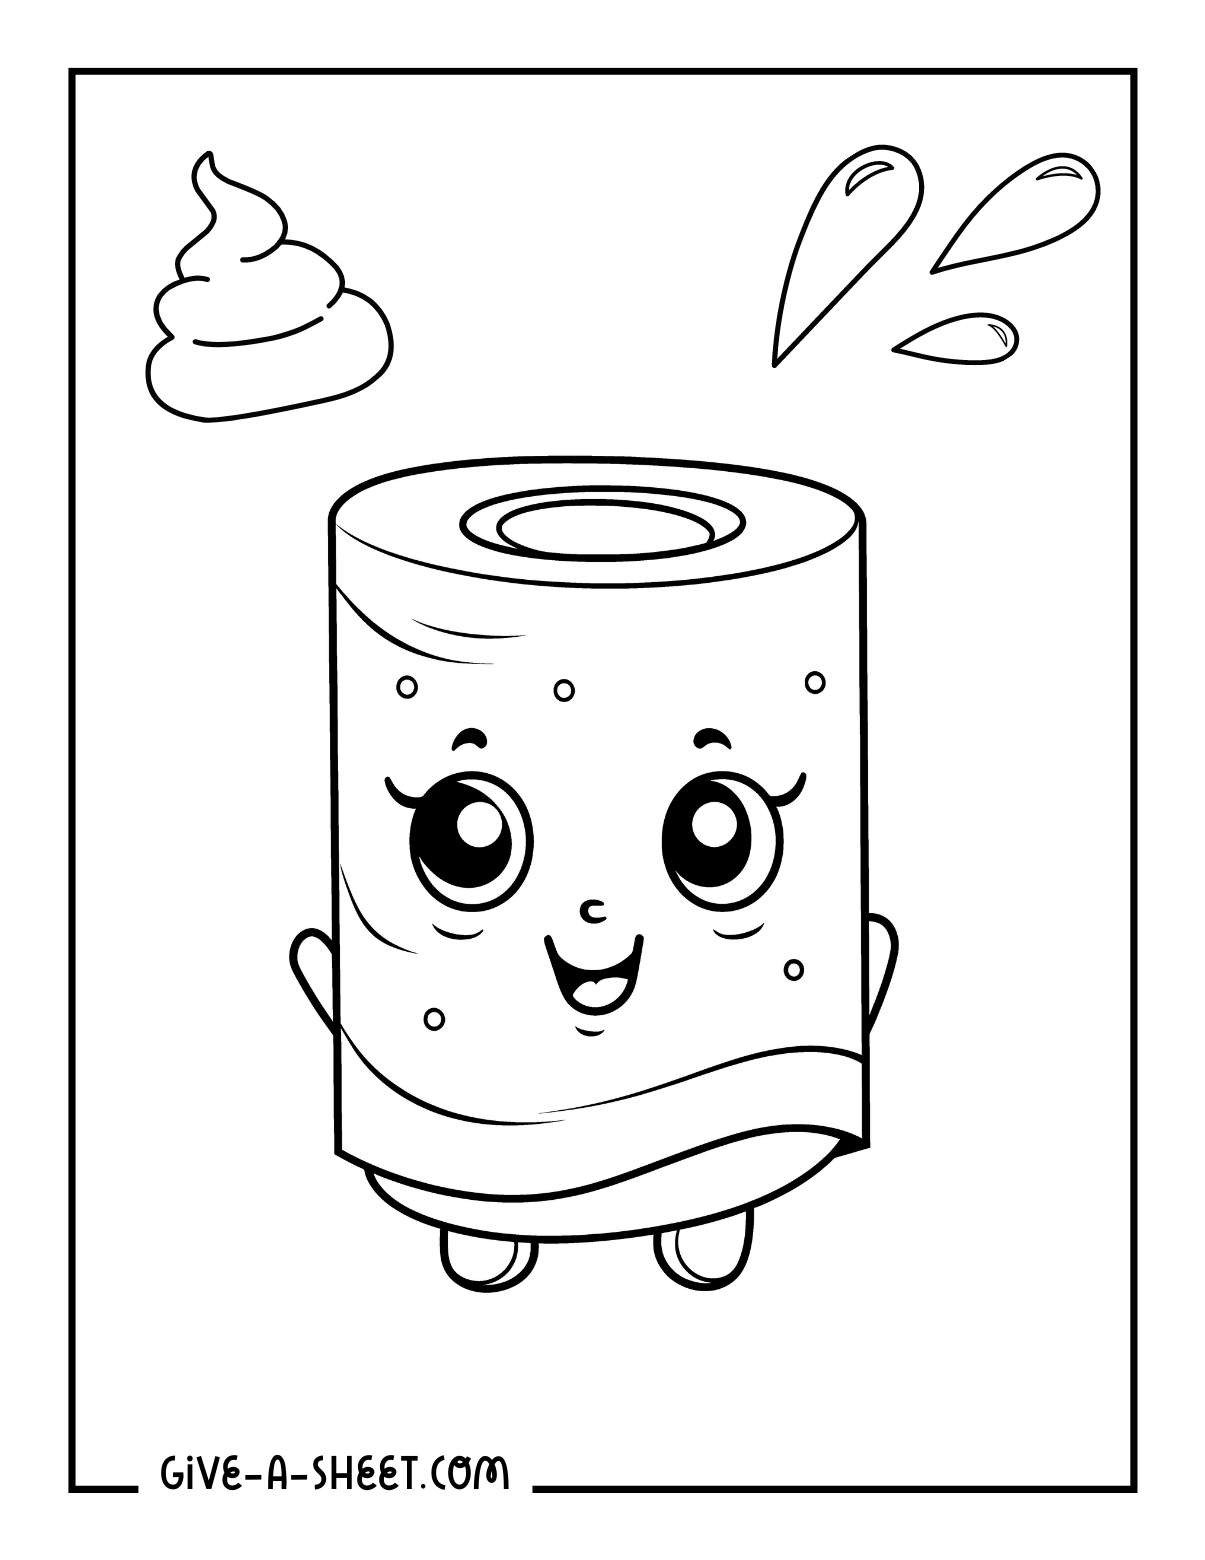 Toilet paper best thing for toilet training coloring sheet.